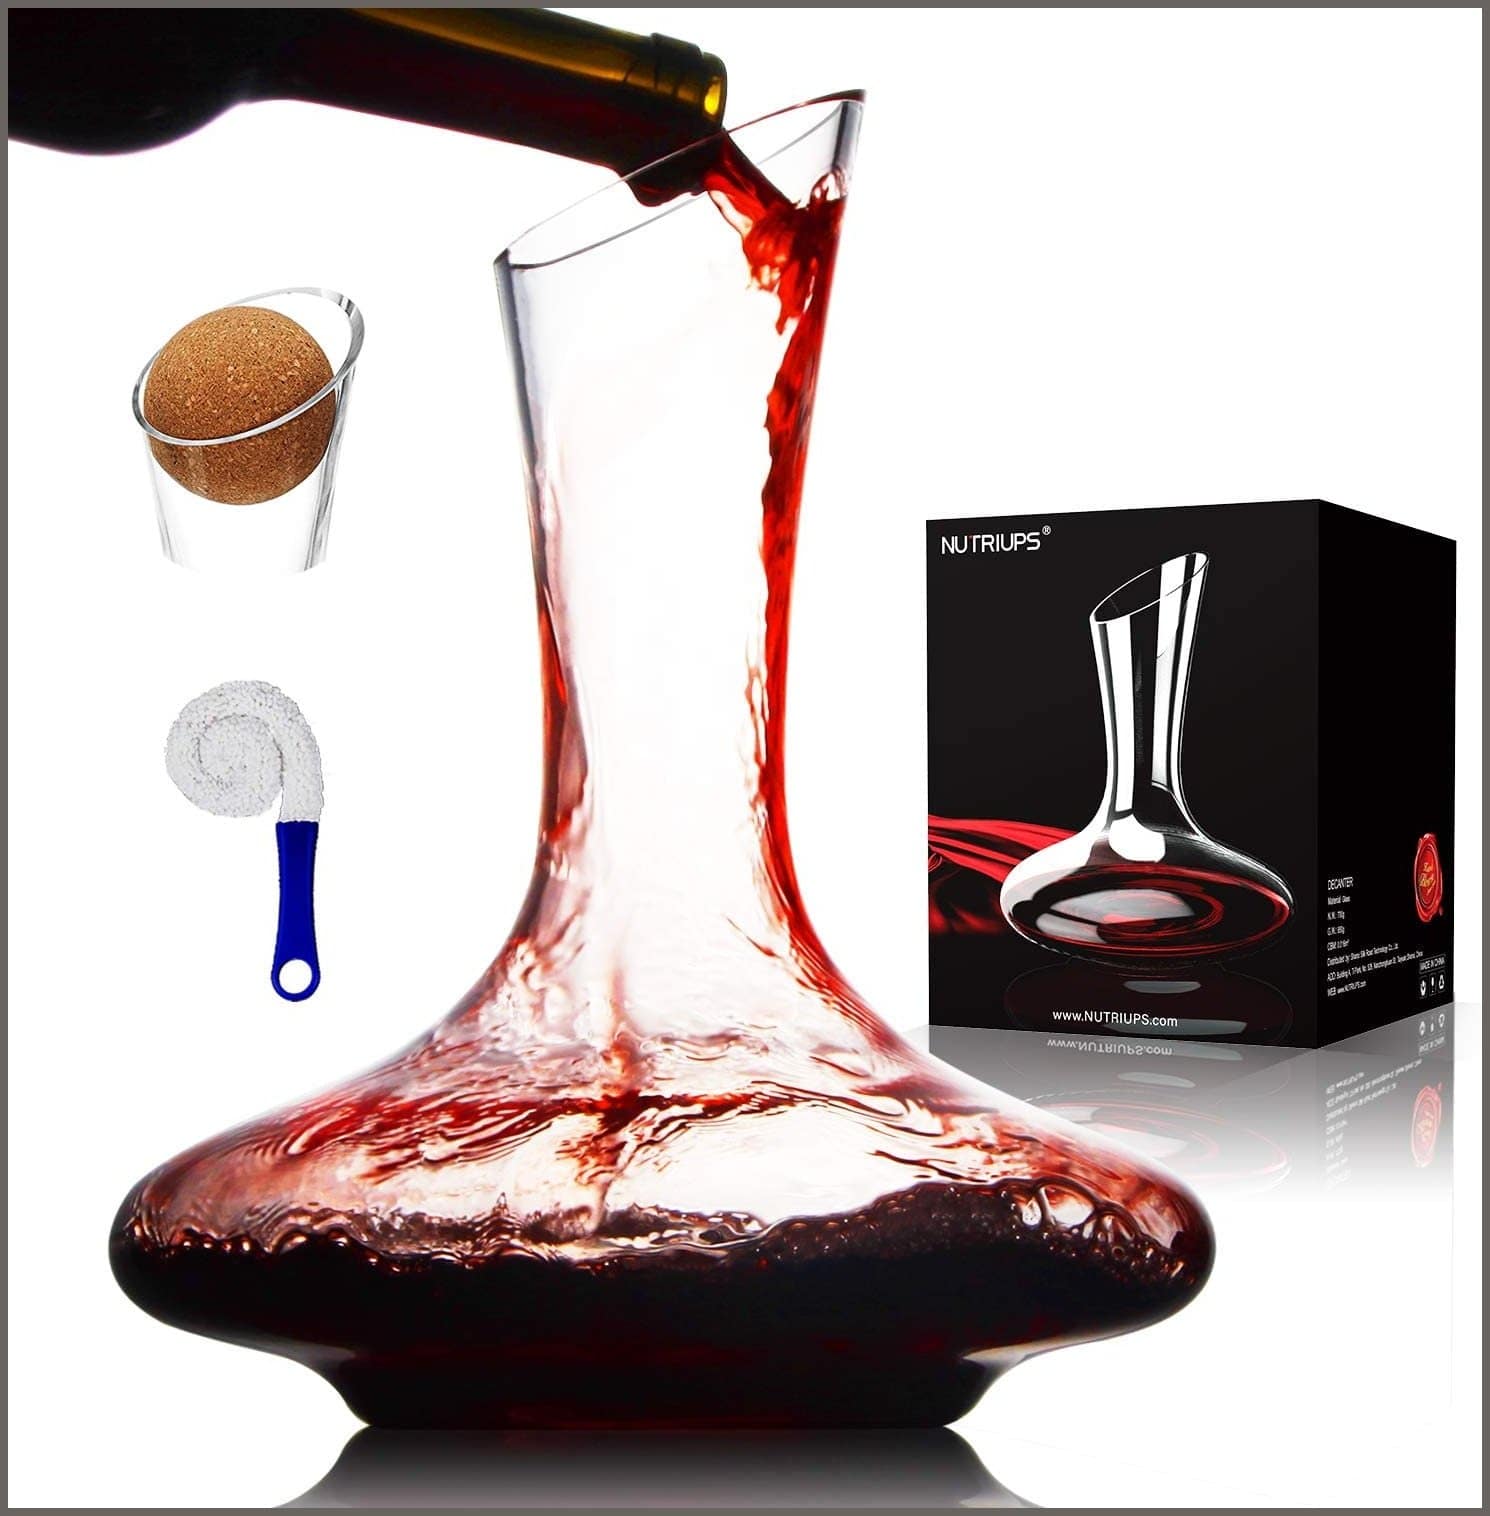 Decanters NUTRIUPS Carafes Decanter Lead Free